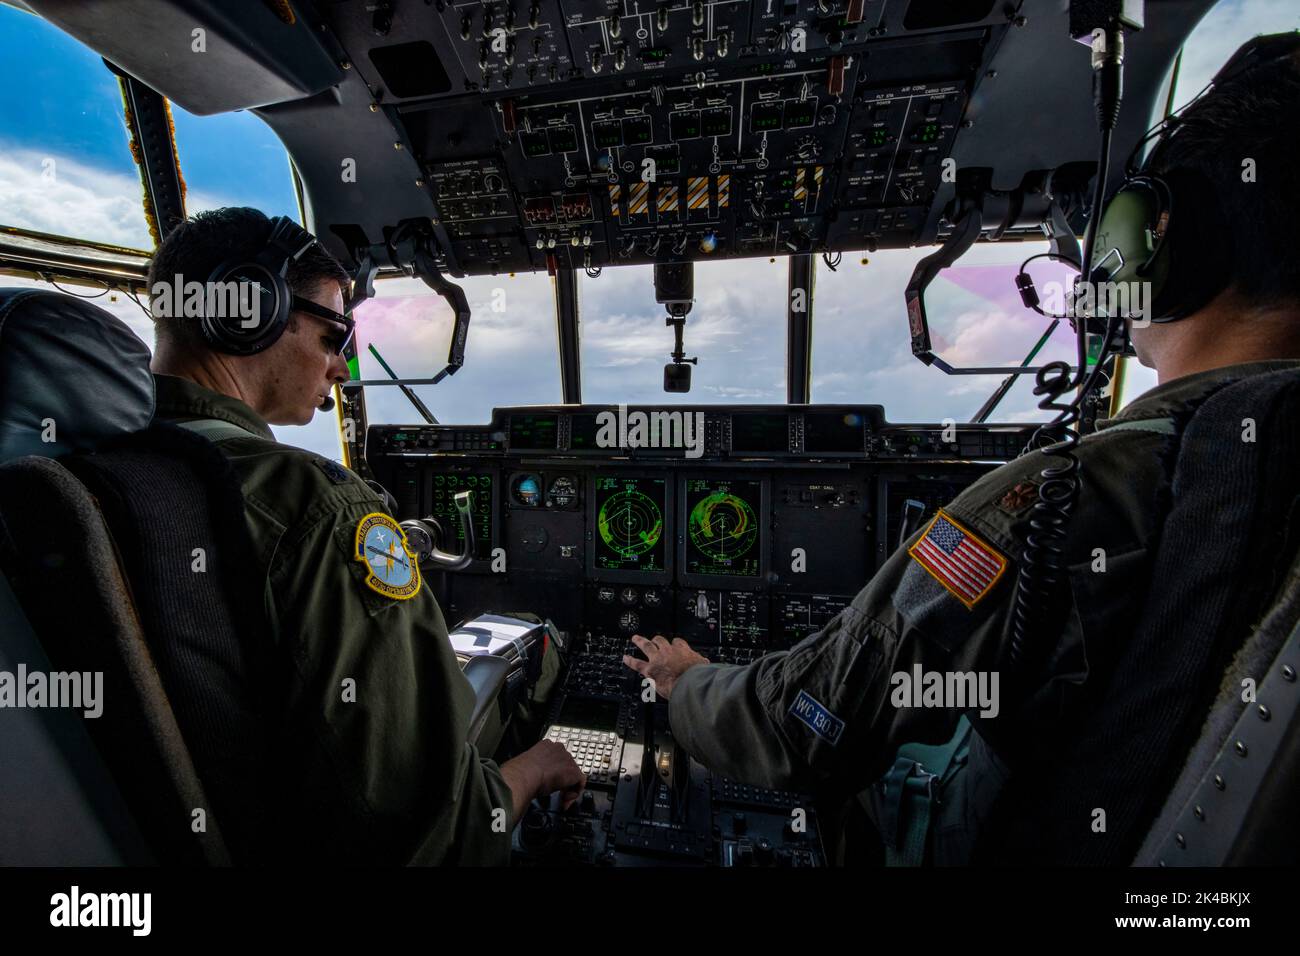 Lt. Col. Dave Gentile, WC-130J aircraft commander, and Maj. Alex Boykin, pilot, fly a 53rd Weather Reconnaissance aircraft into Hurricane Ian Sept. 27, 2022. The 53rd WRS, or Hurricane Hunters, fly missions into hurricanes to collect data for forecasters at the National Hurricane Center. (U.S. Air Force photo by Staff Sgt. Kristen Pittman) Stock Photo